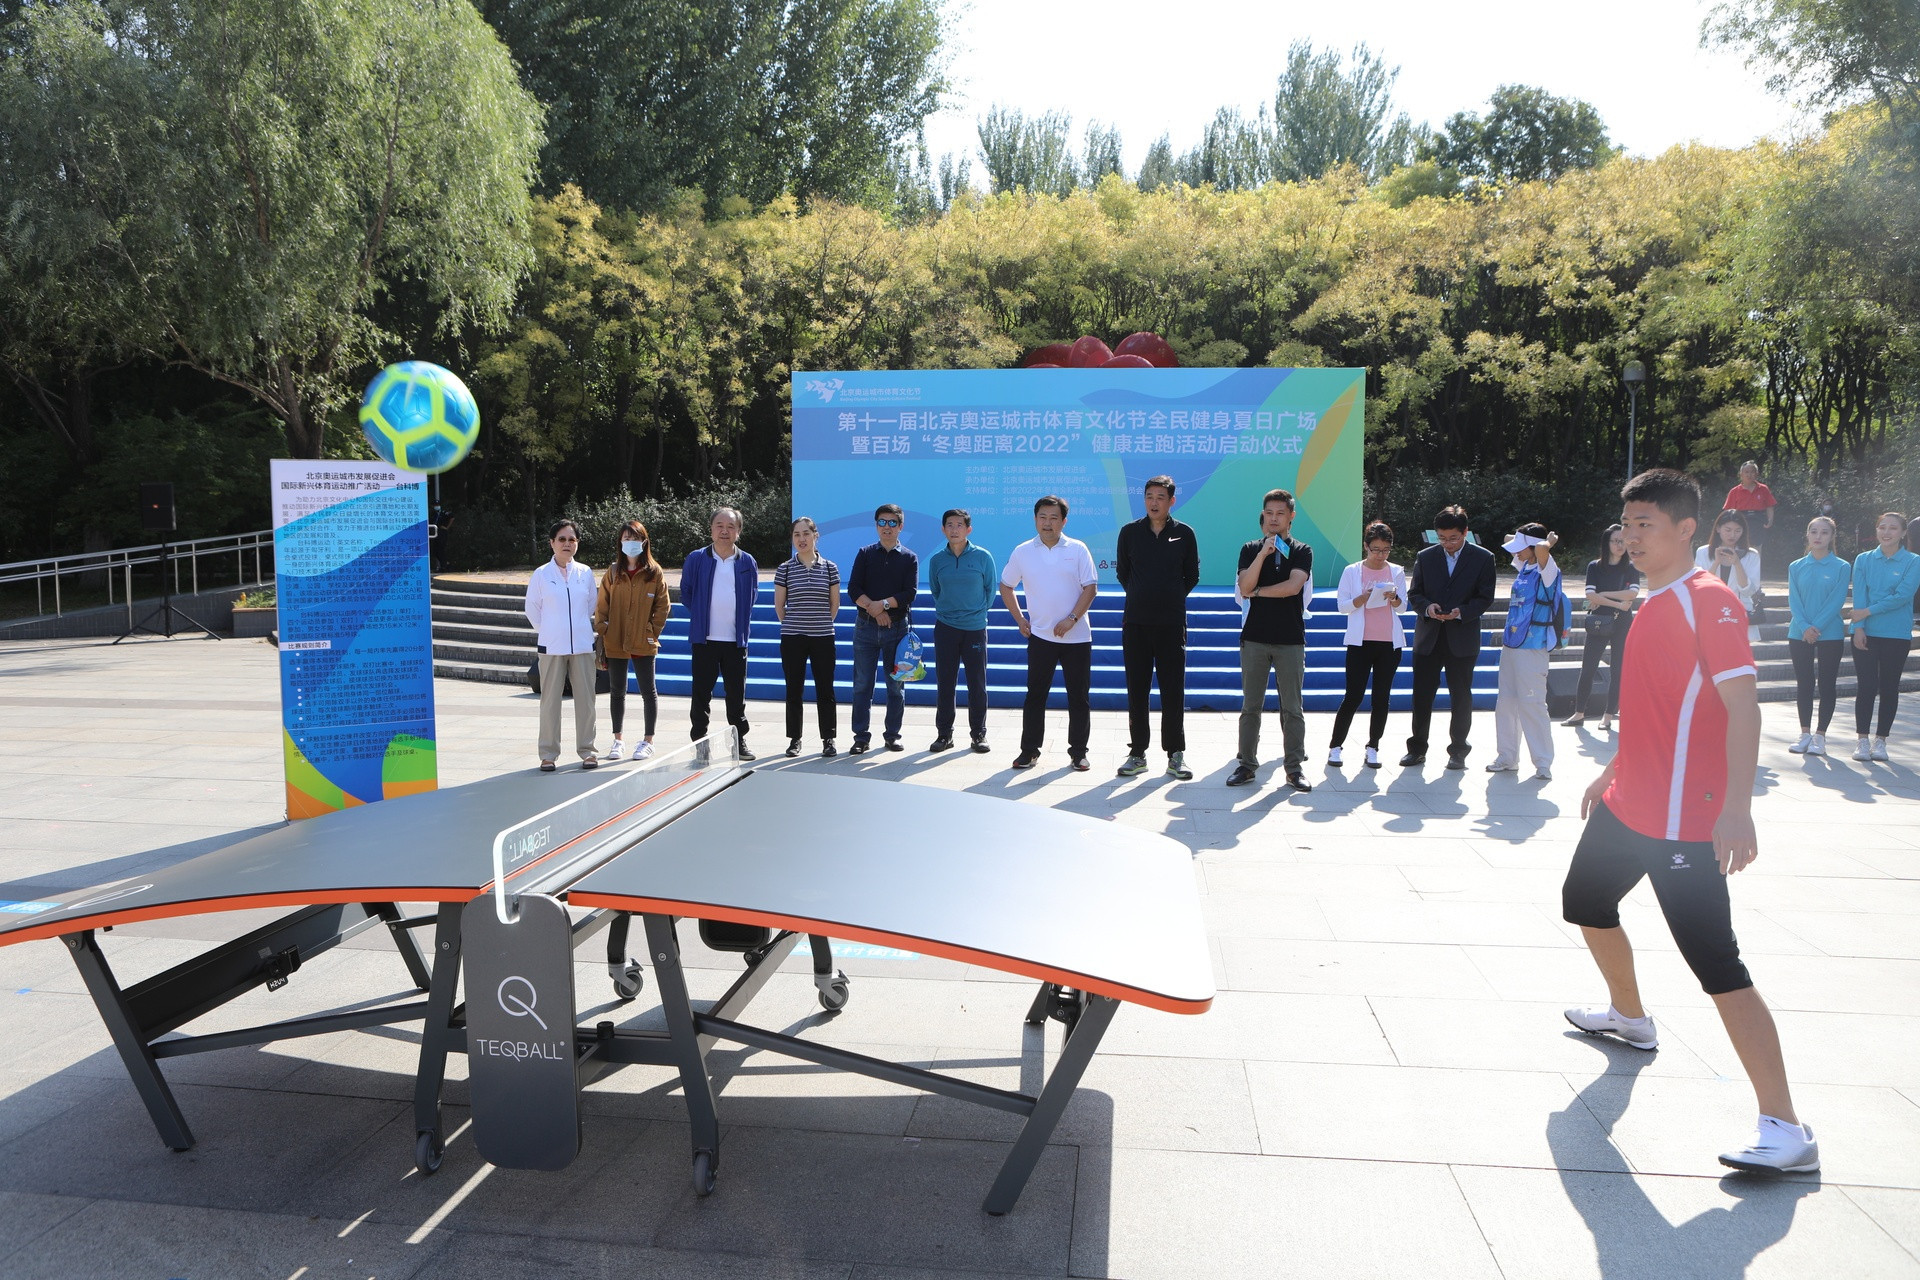 A teqball exhibition event has been held in Beijing ©FITEQ